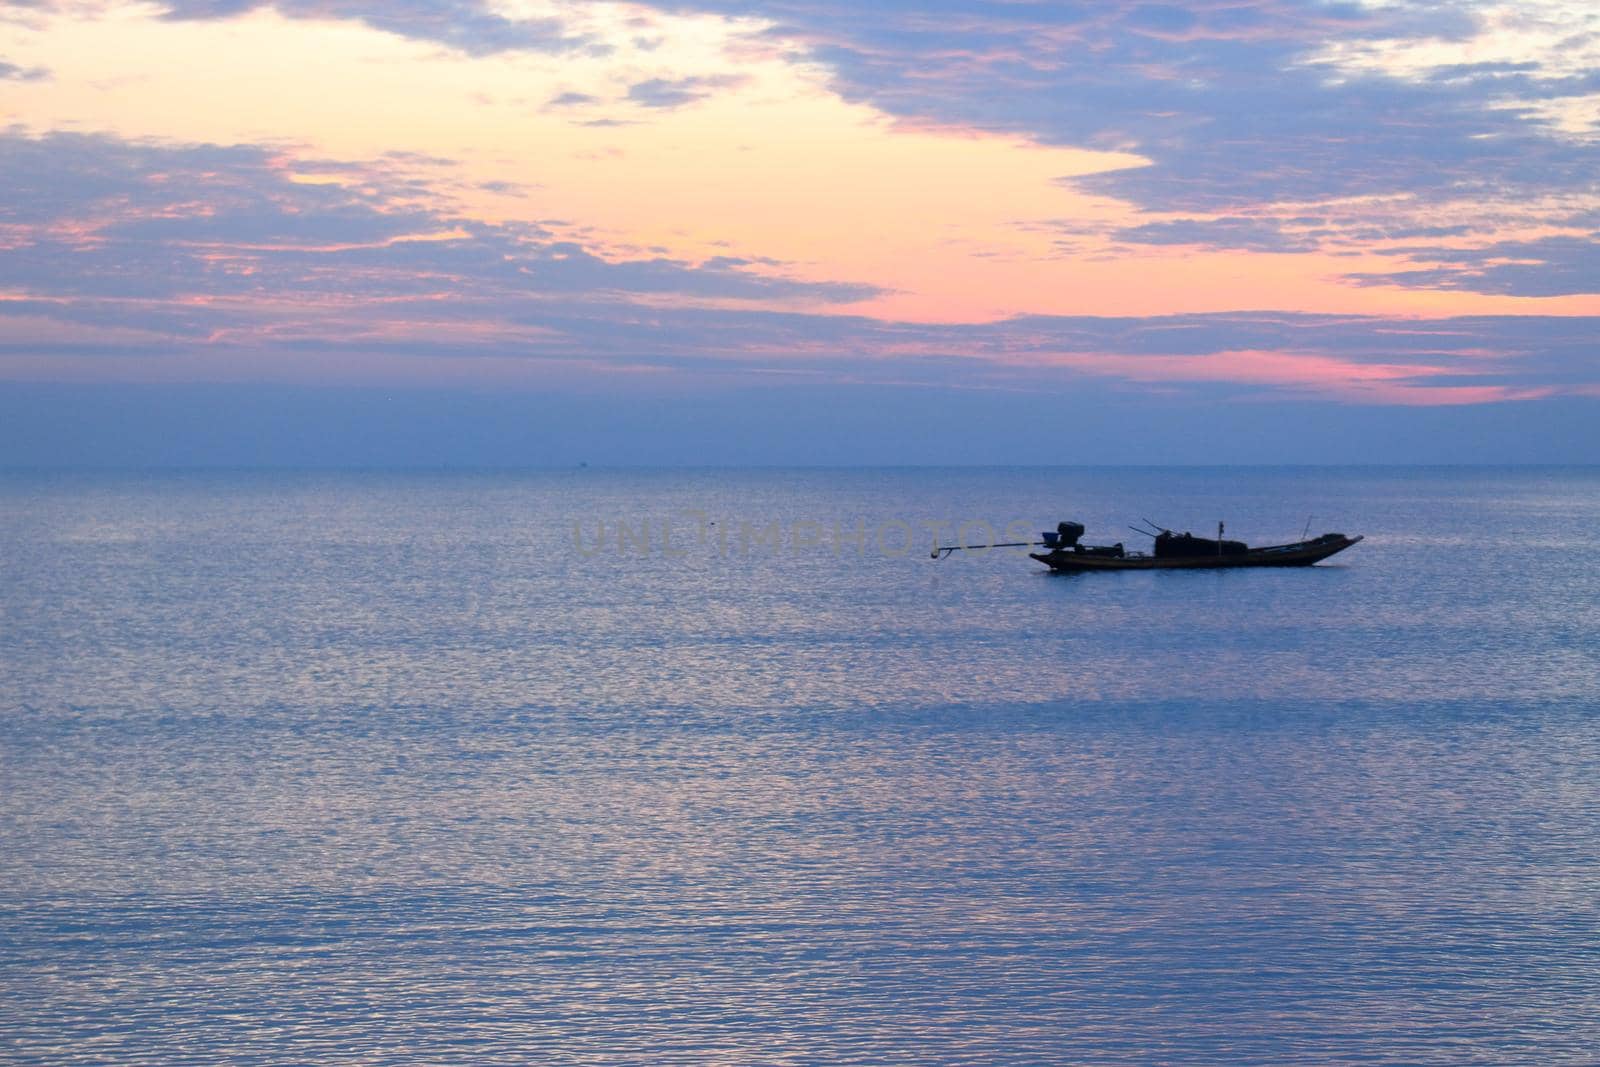 Boat silhouette, early morning, different perspectives, near and far